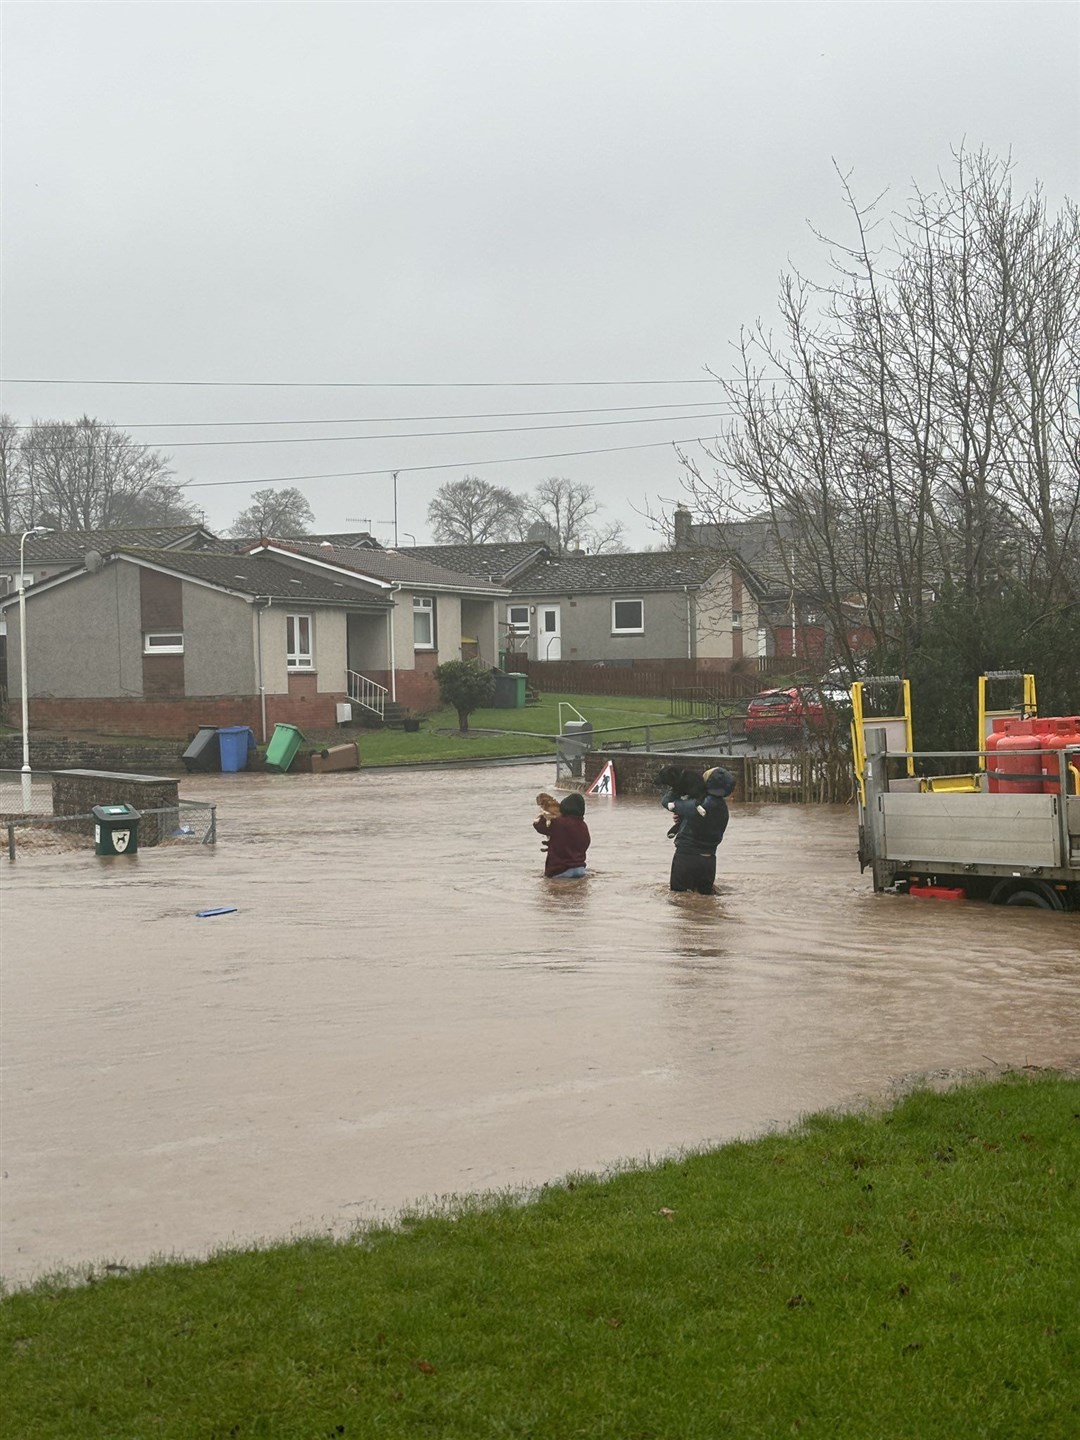 James Matheson says it is the worst flooding he has ever seen in Cupar (James Matheson/PA)